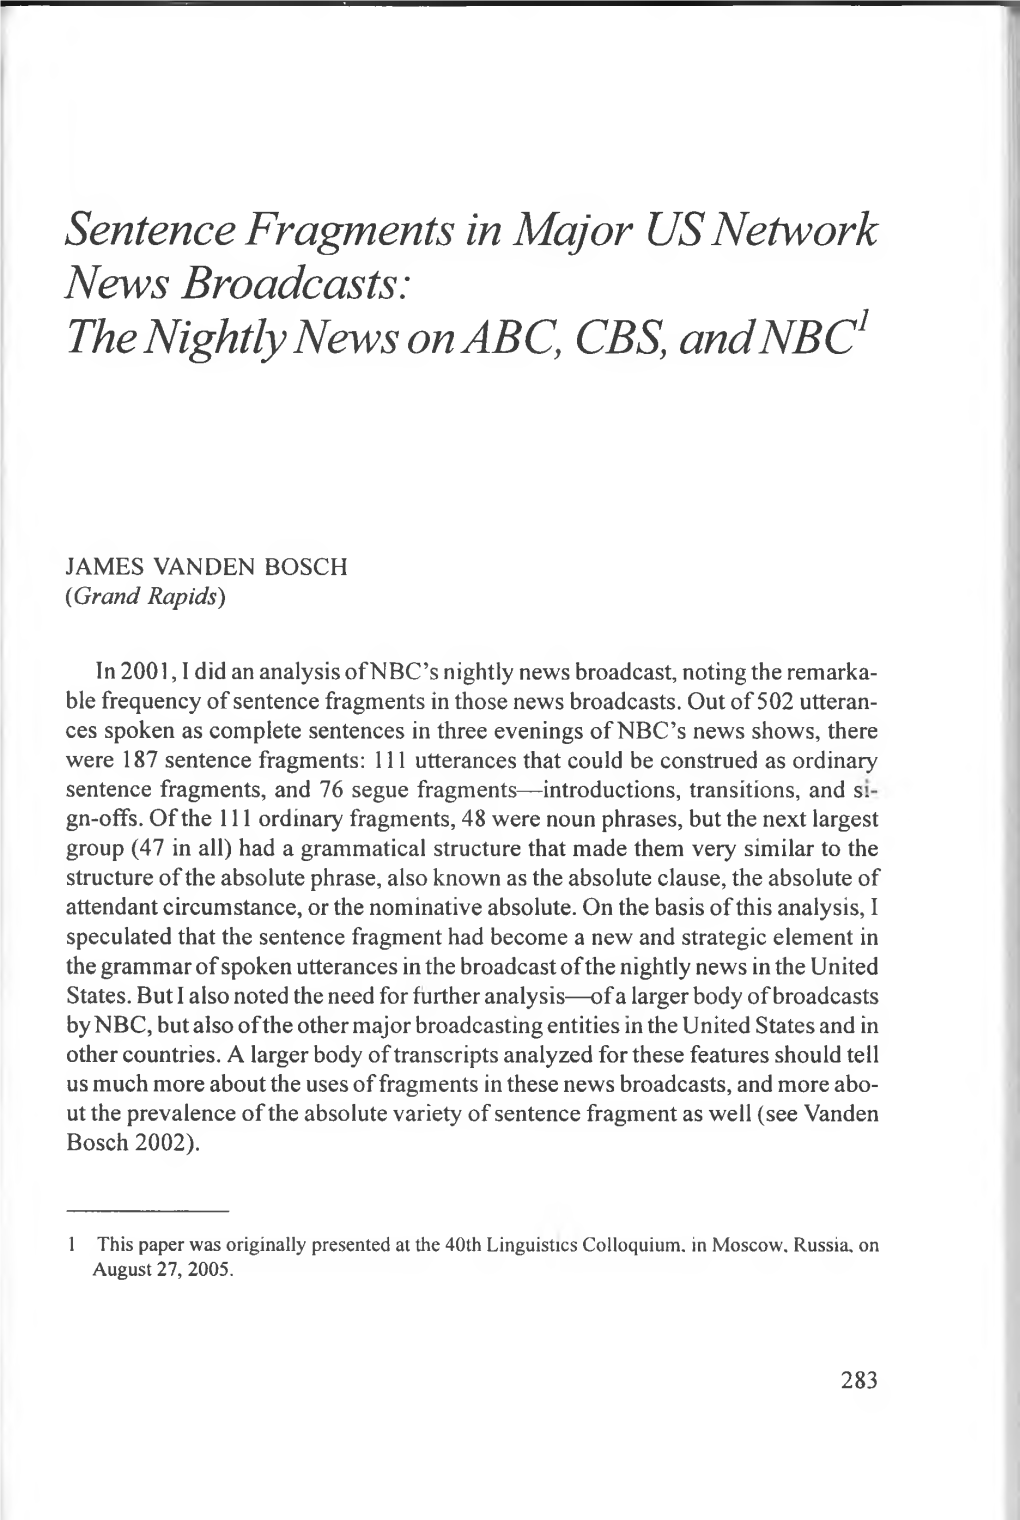 Sentence Fragments in Major US Network News Broadcasts: the Nightly News on ABC, CBS, and NBC1